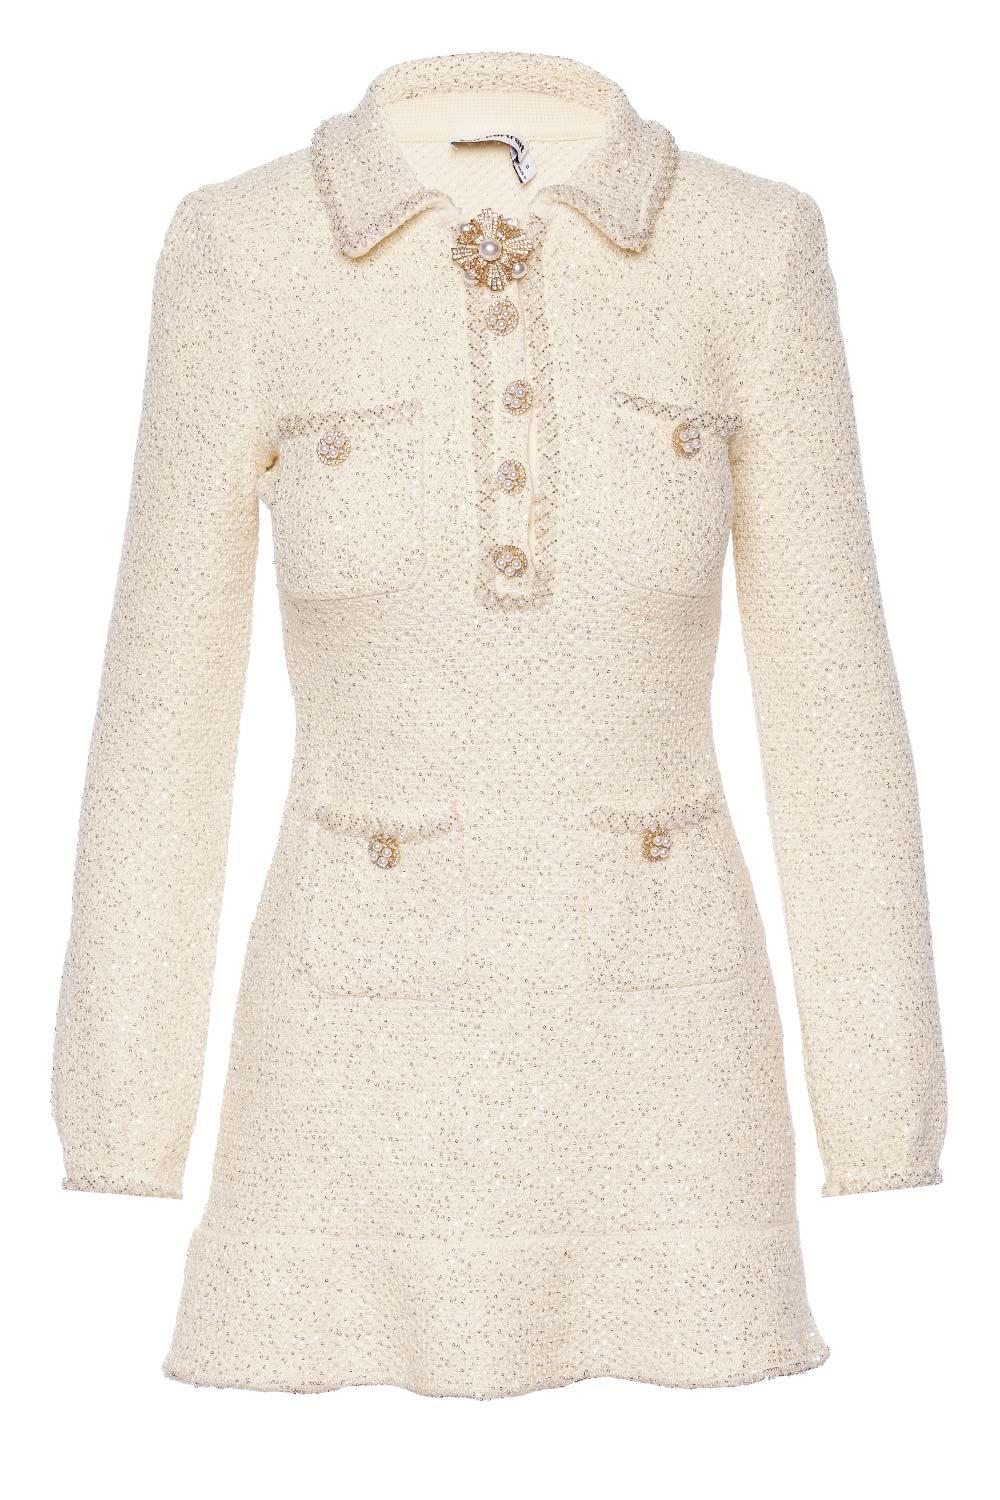 Self-Portrait Sequin And Pearl Knit Mini Dress in Natural | Lyst